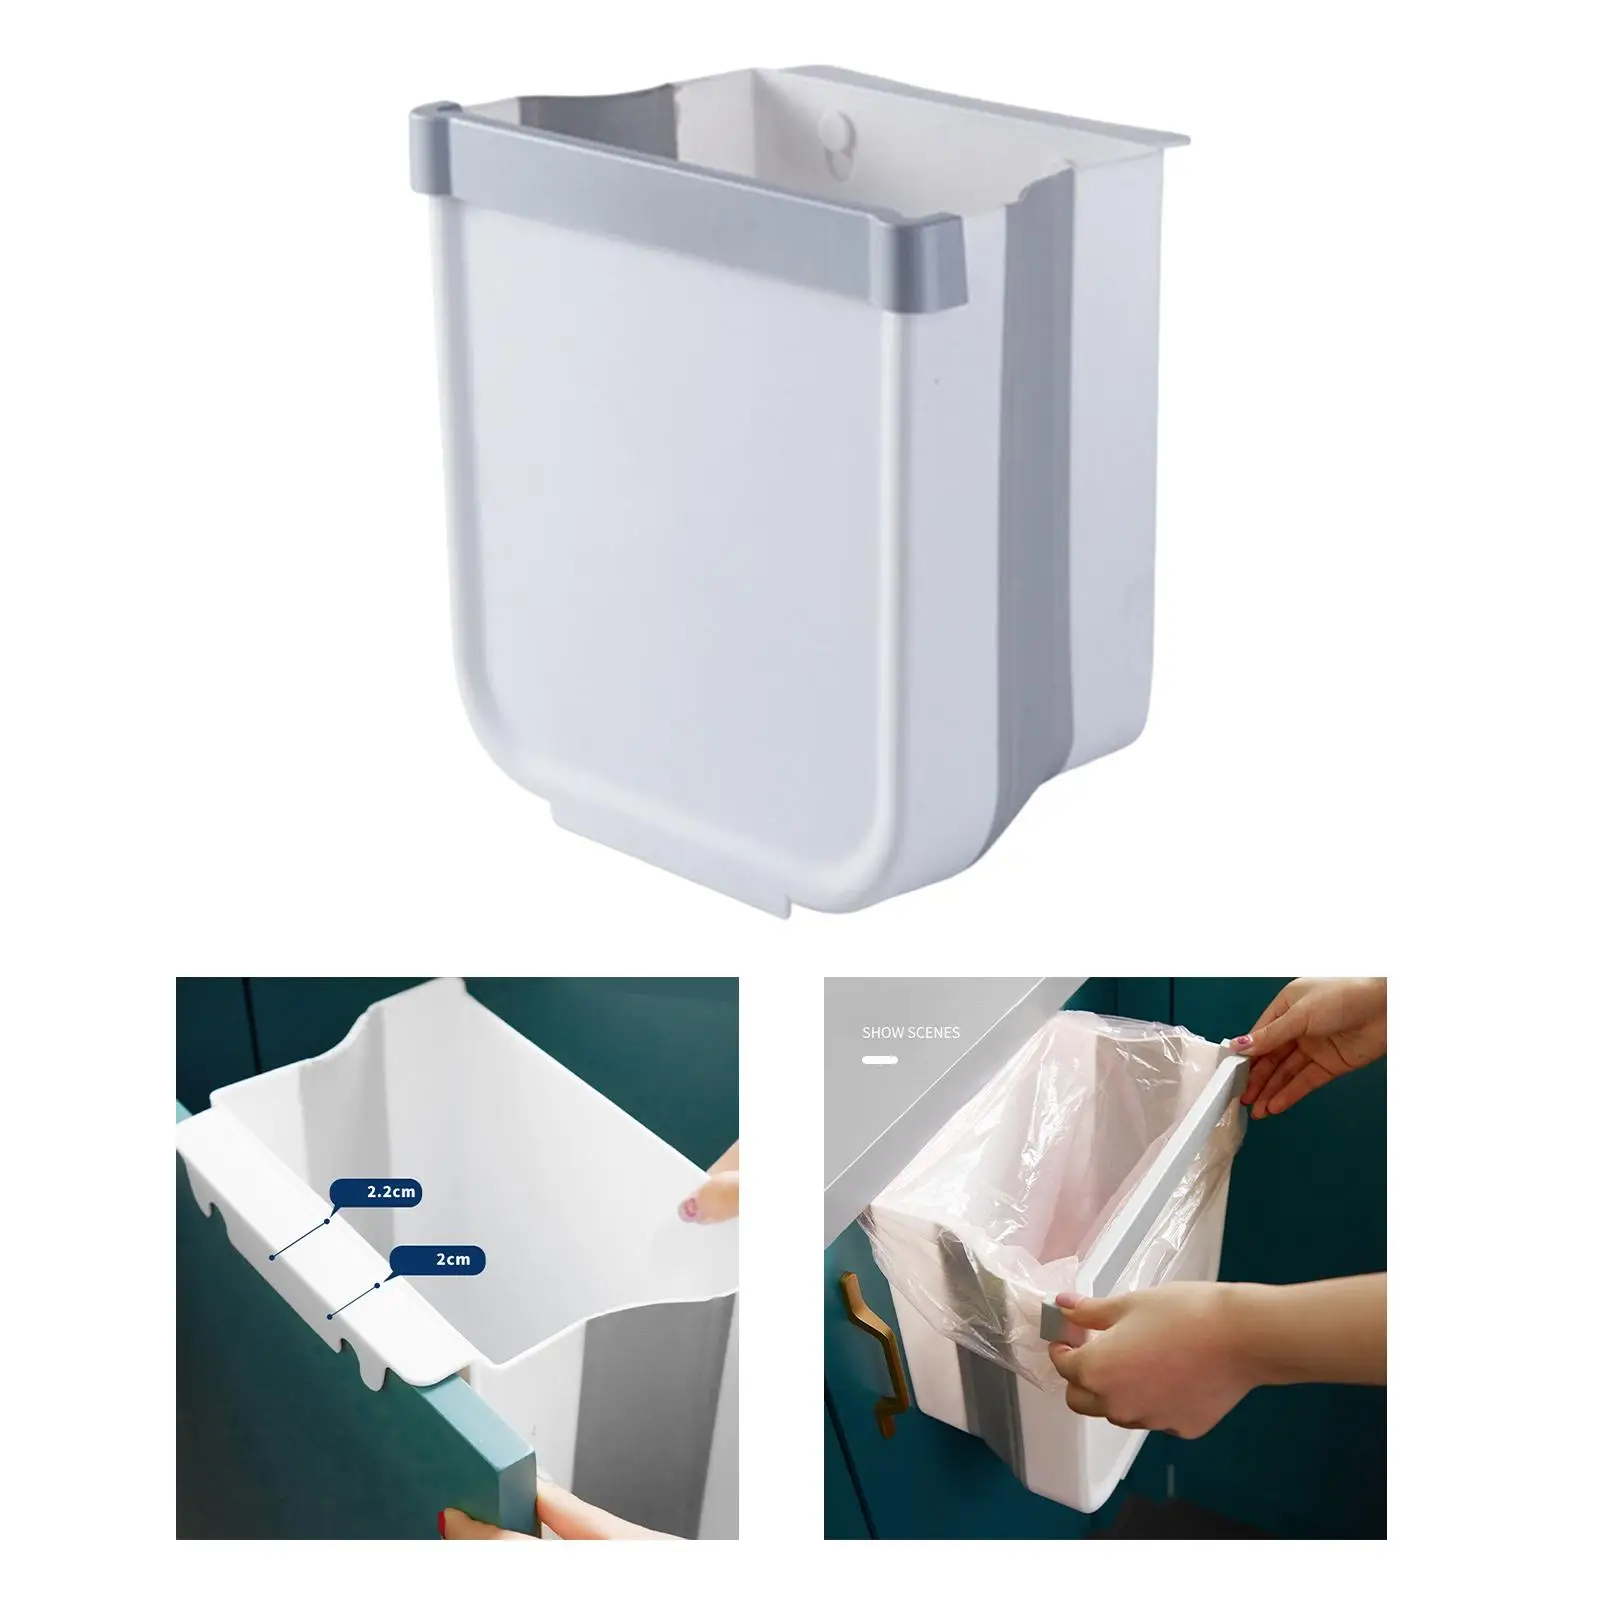 Foldable Wall Mounted Trash Can Hanging Waste Bin Dust Bin Recycle Rubbish Bin for Kitchen Cabinet Outdoor Travel Camping Car